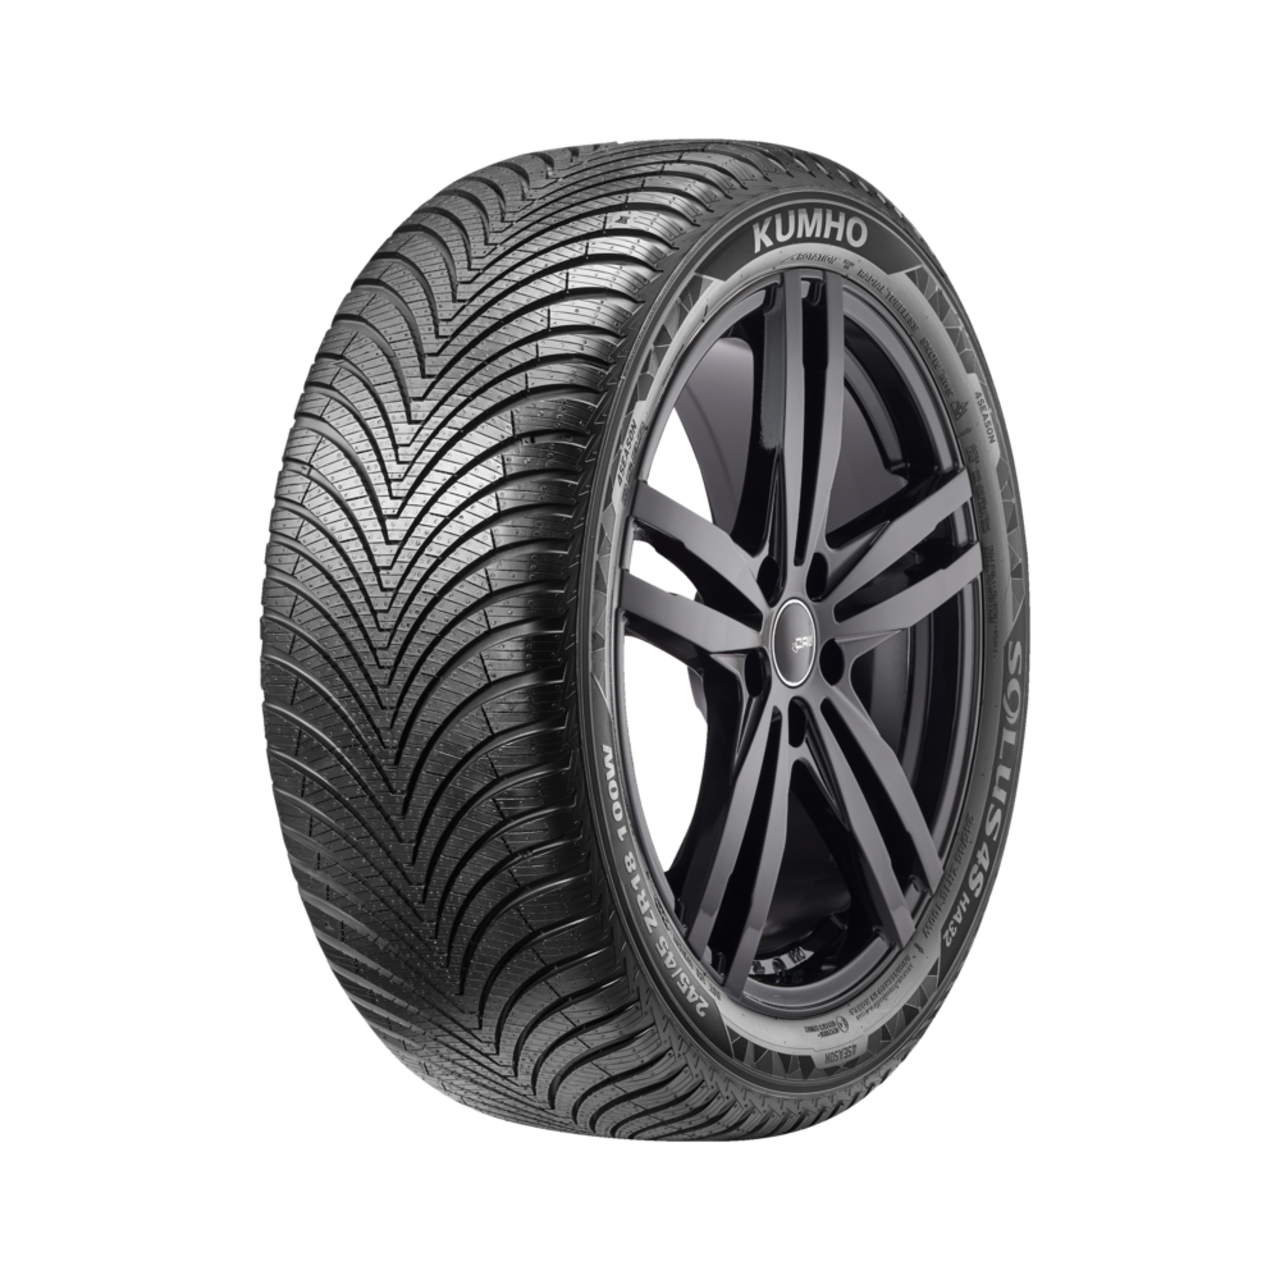 Weather | Passenger Solus & Kumho CUV Canadian For Tire 4S All Tire HA32